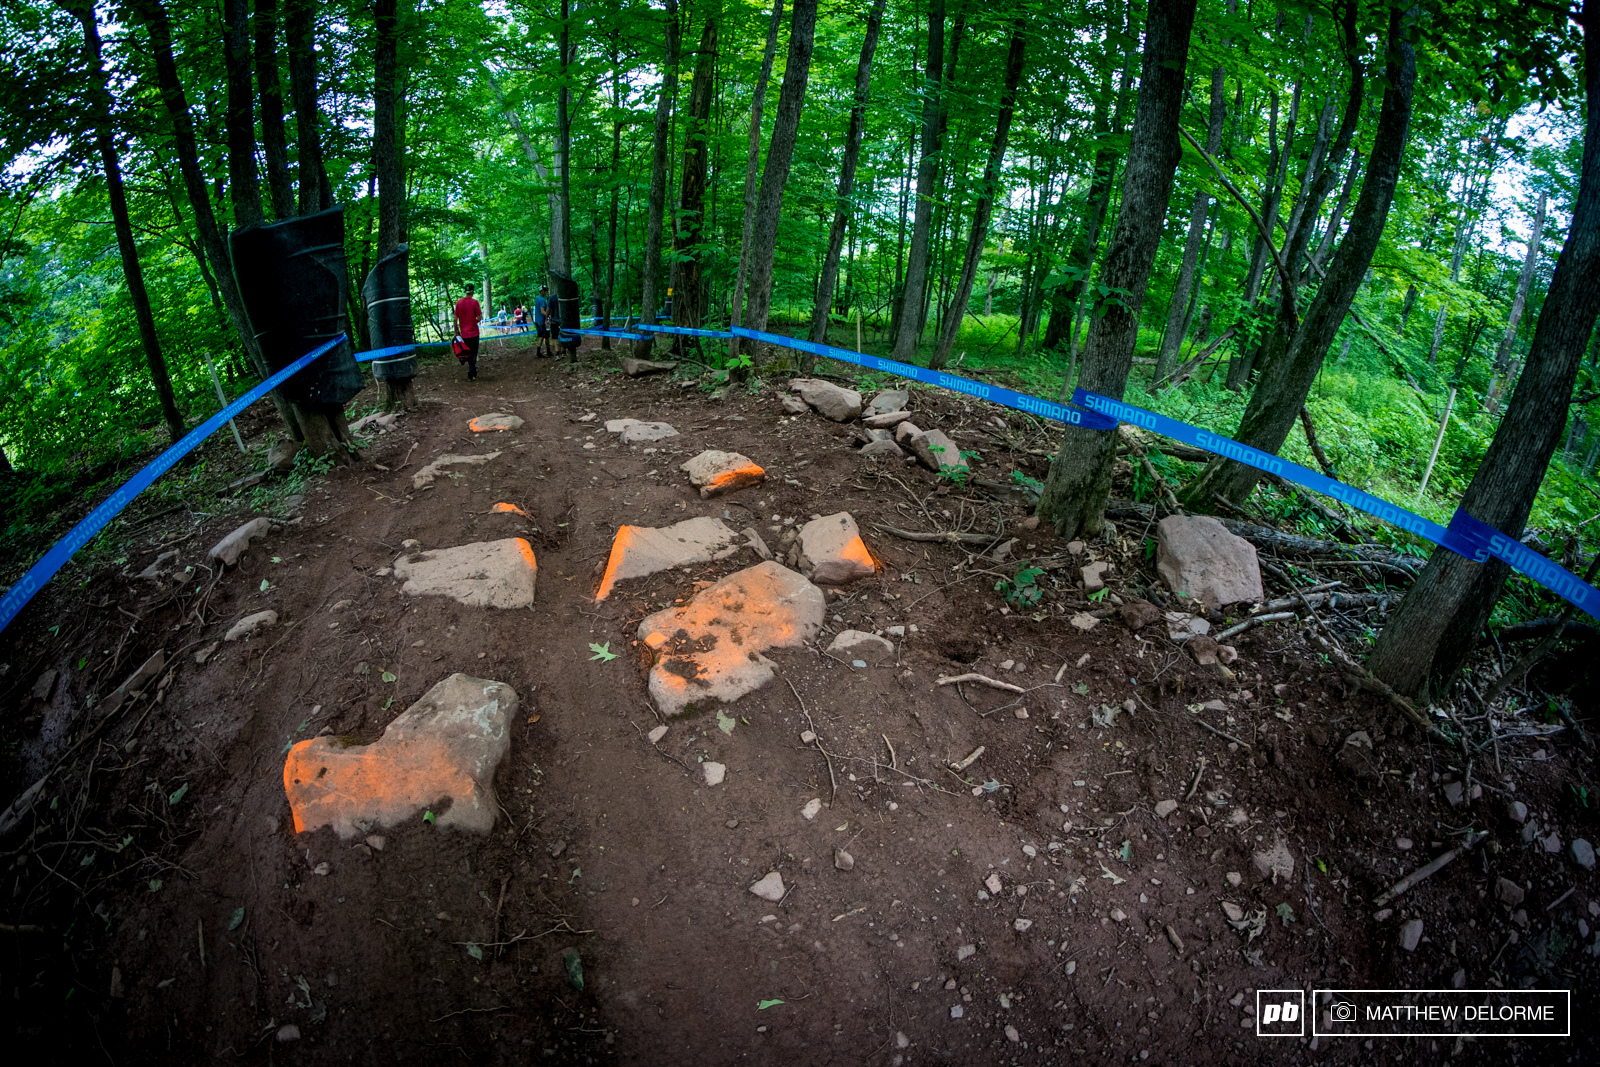 World Cup downhill tracks are supposed to be rough and technical, but it seems this year the track has been soothed out just a bit more. There may be about 12 cans of orange spray paint on the rocks.